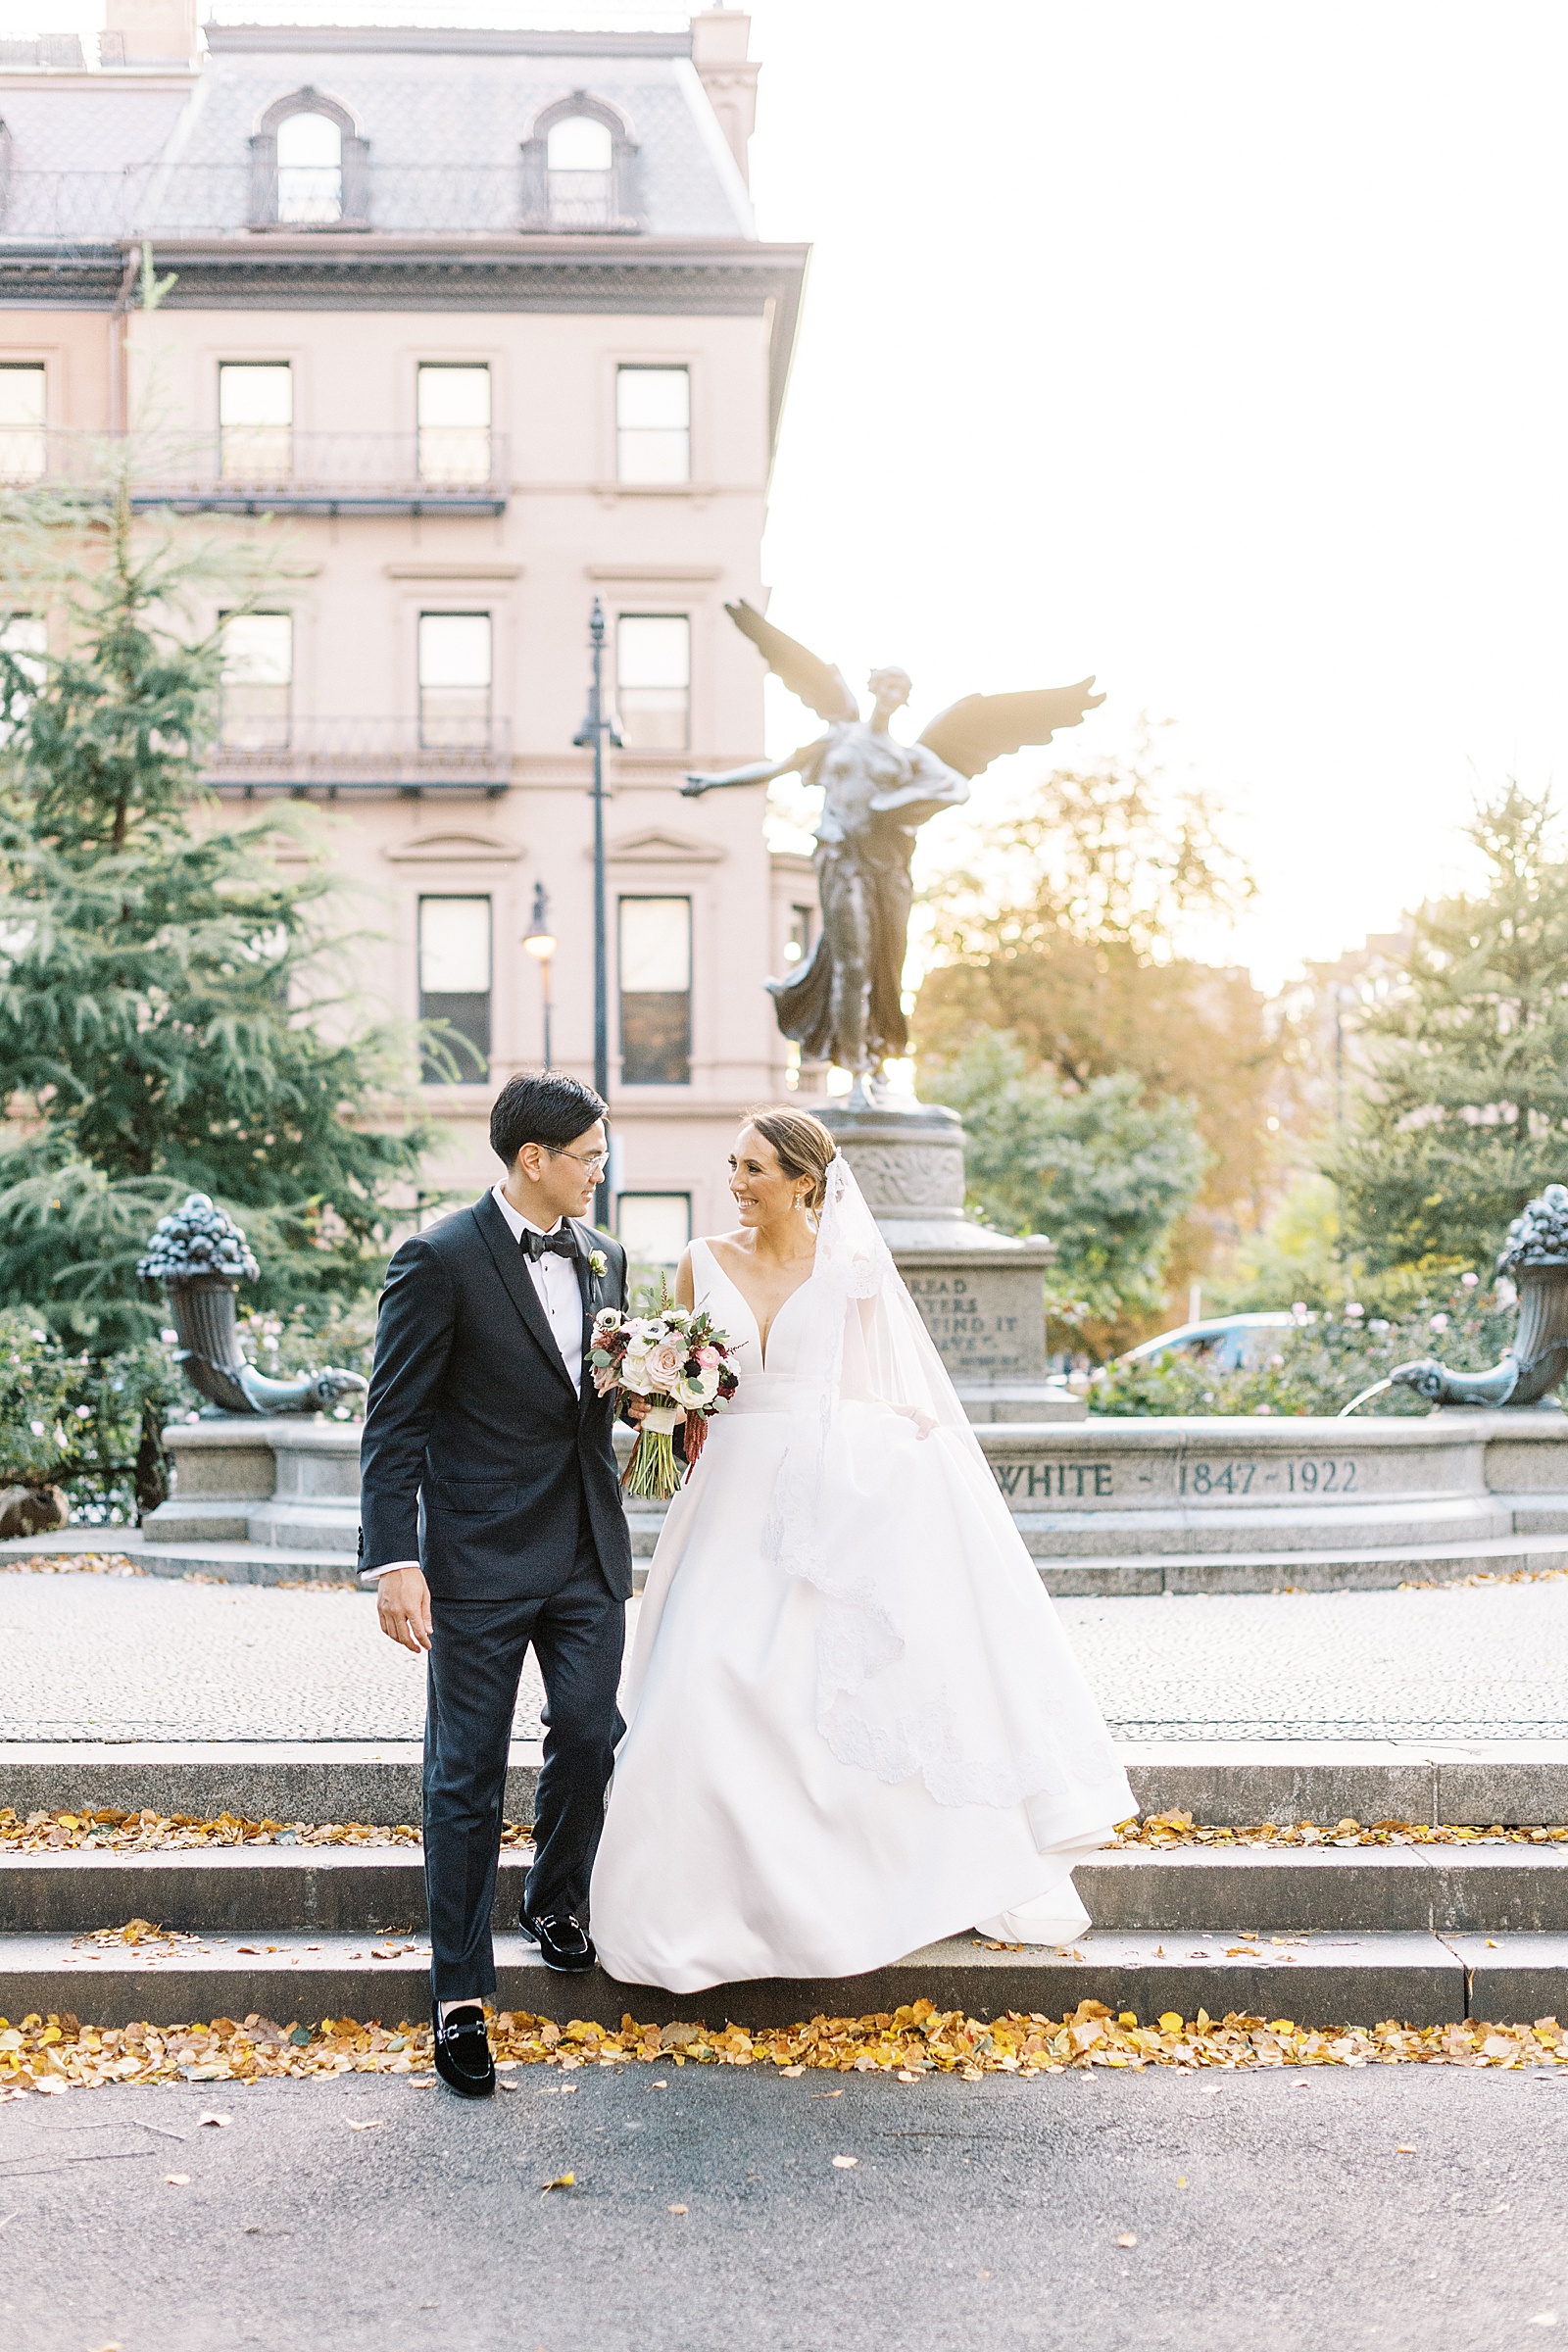 Bride and groom walking down steps in a garden by Boston Wedding Photographer, Lynne Reznick.